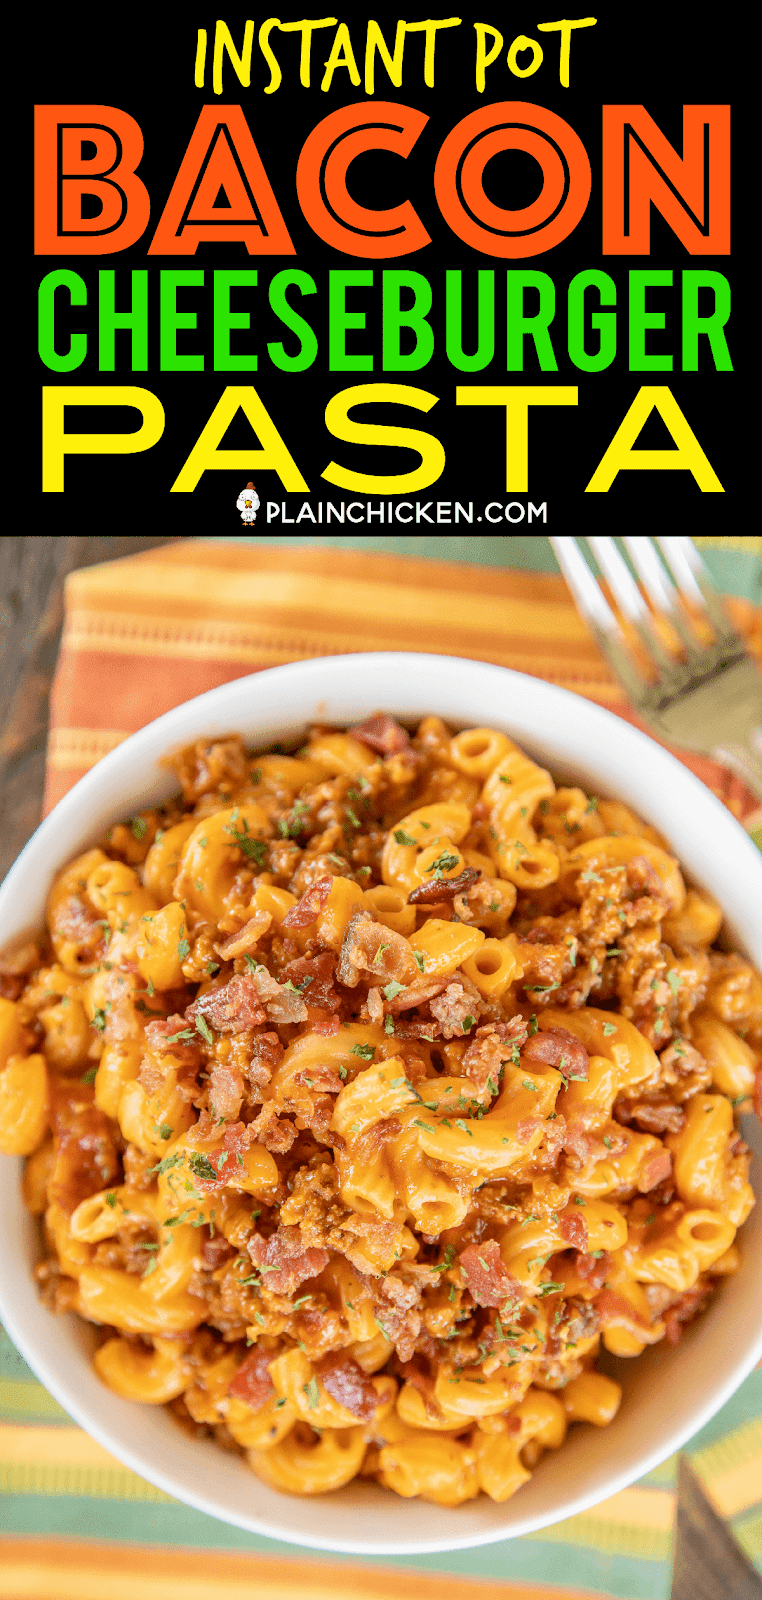 Instant Pot Bacon Cheeseburger Pasta - a weeknight family favorite! Just cook the ground beef, add the pasta and liquids, cook for 4 minutes then stir in the cheese and bacon. Super easy!!! Ground beef, tomato juice, beef broth, Worcestershire sauce, steak seasoning, ketchup, mustard, elbow macaroni, bacon and cheddar cheese. Our whole family LOVED this easy pasta recipe! It is definitely going into the rotation. #Instantpot #beef #pasta #cheese